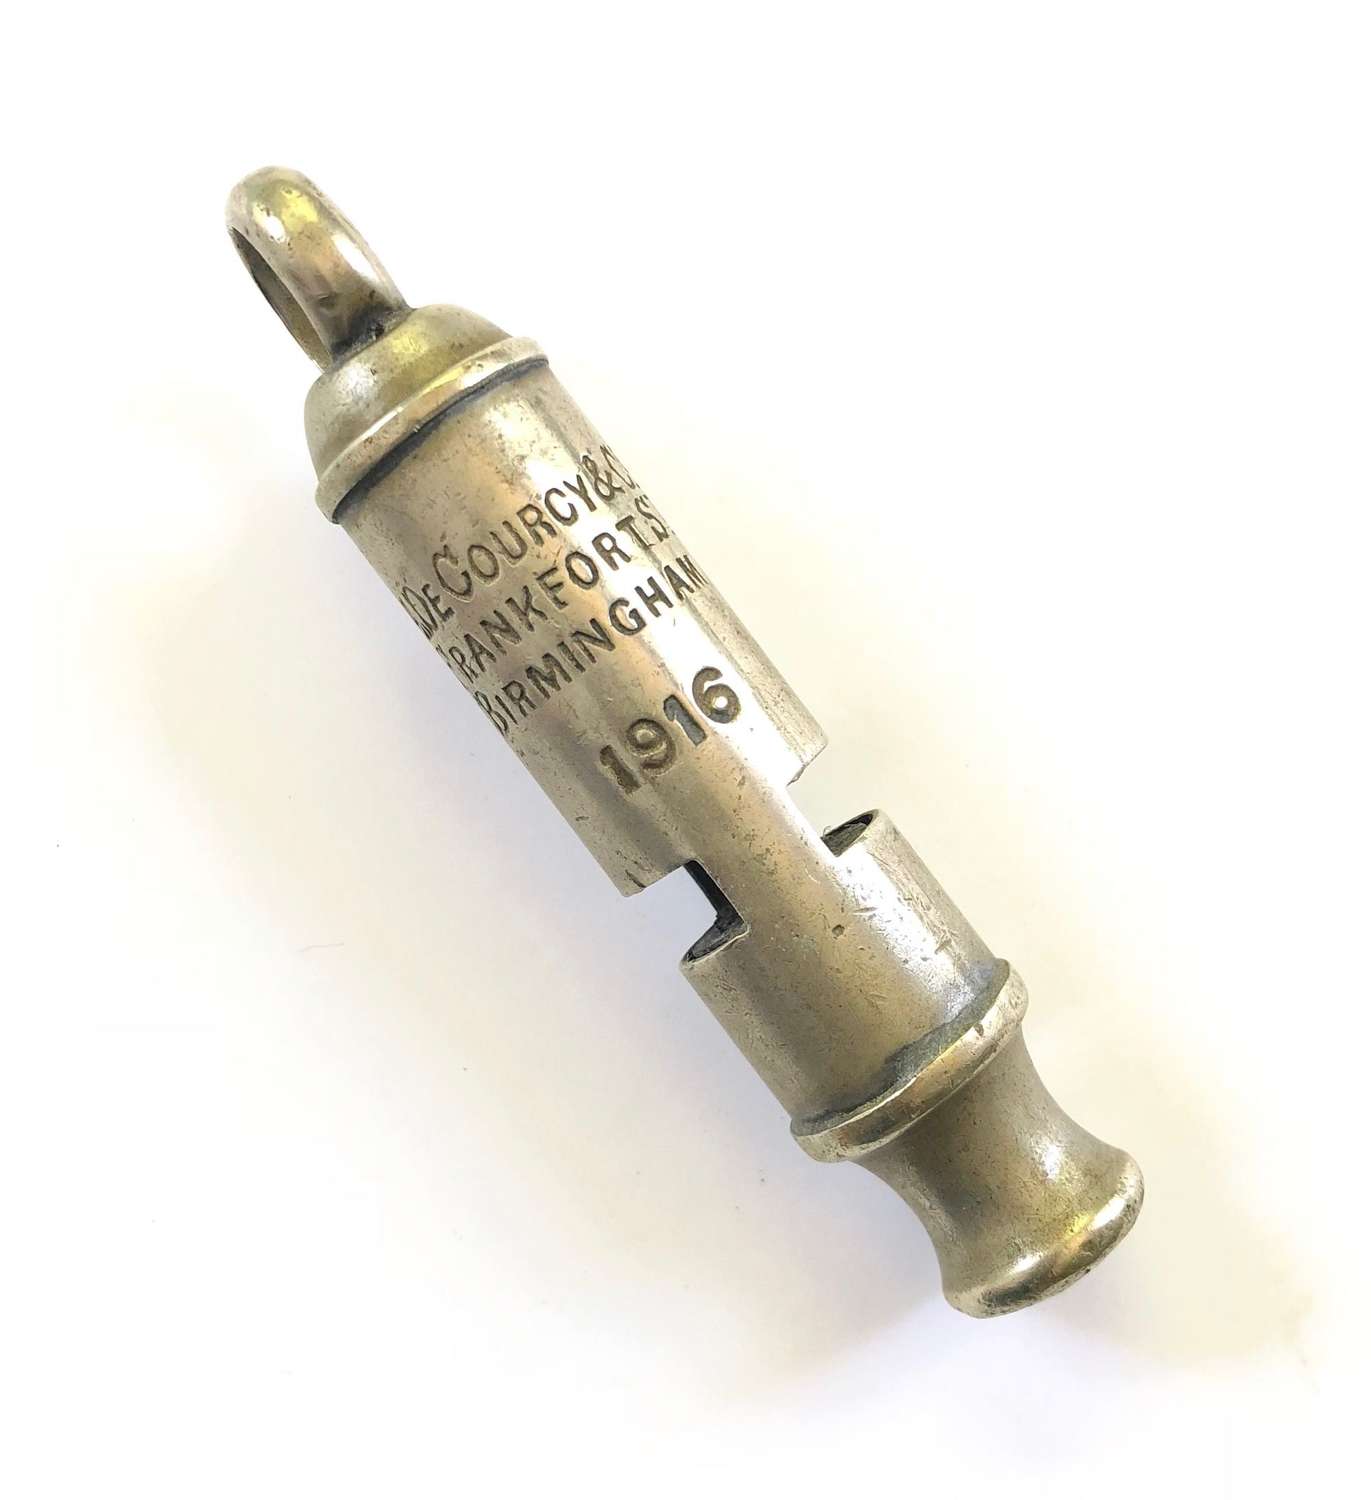 WW1 1916 British Officer's Trench Whistle.